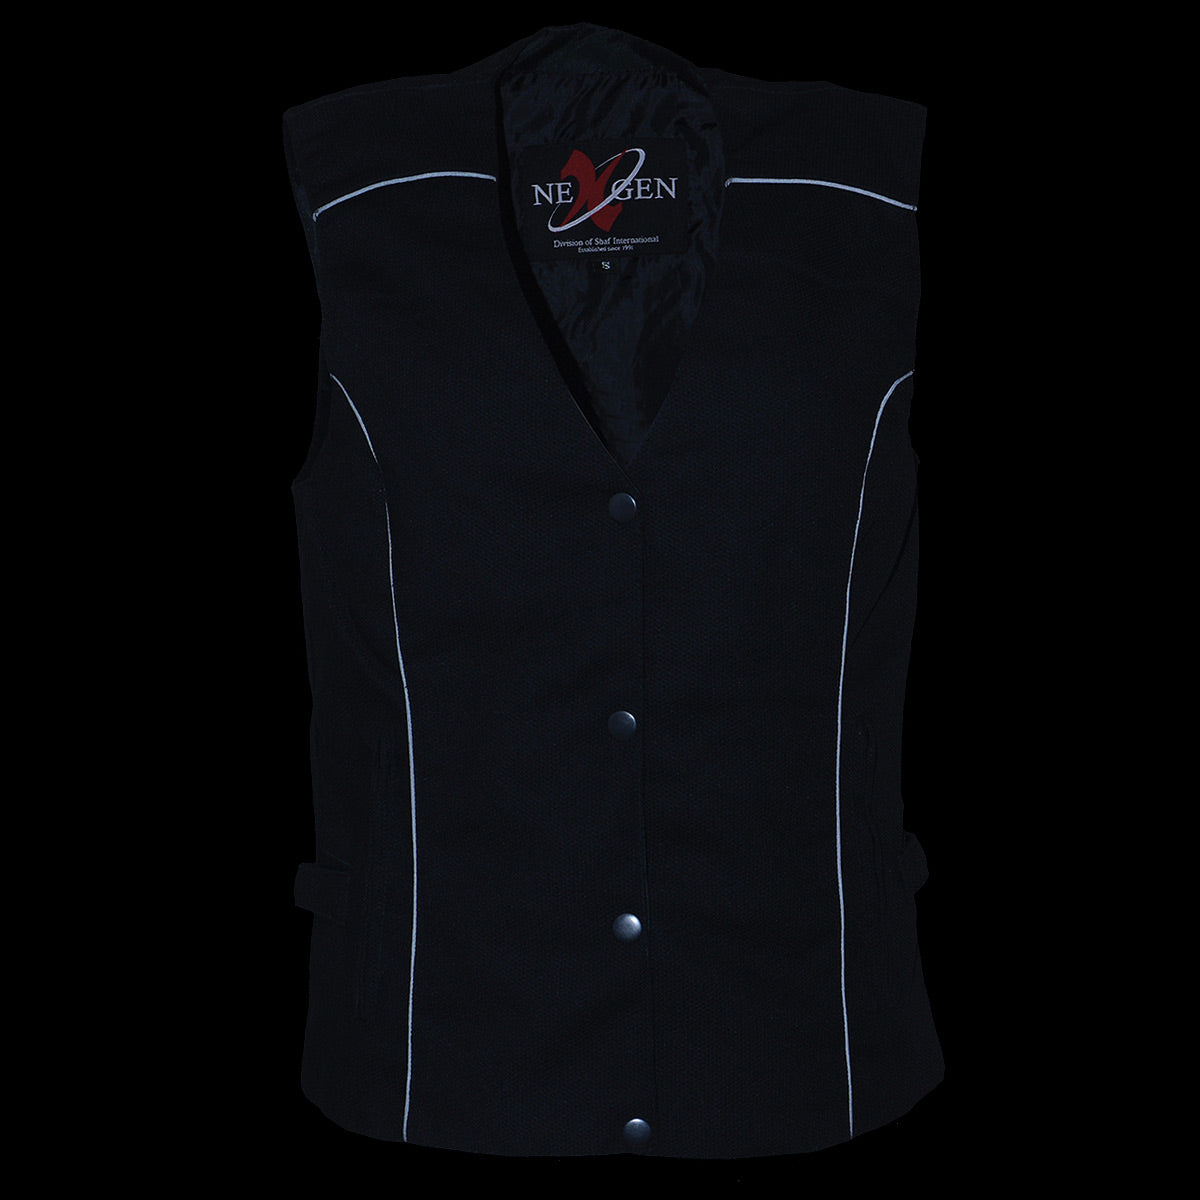 Milwaukee Leather SH1955 Ladies Black Textile Vest with Wing Embroidery